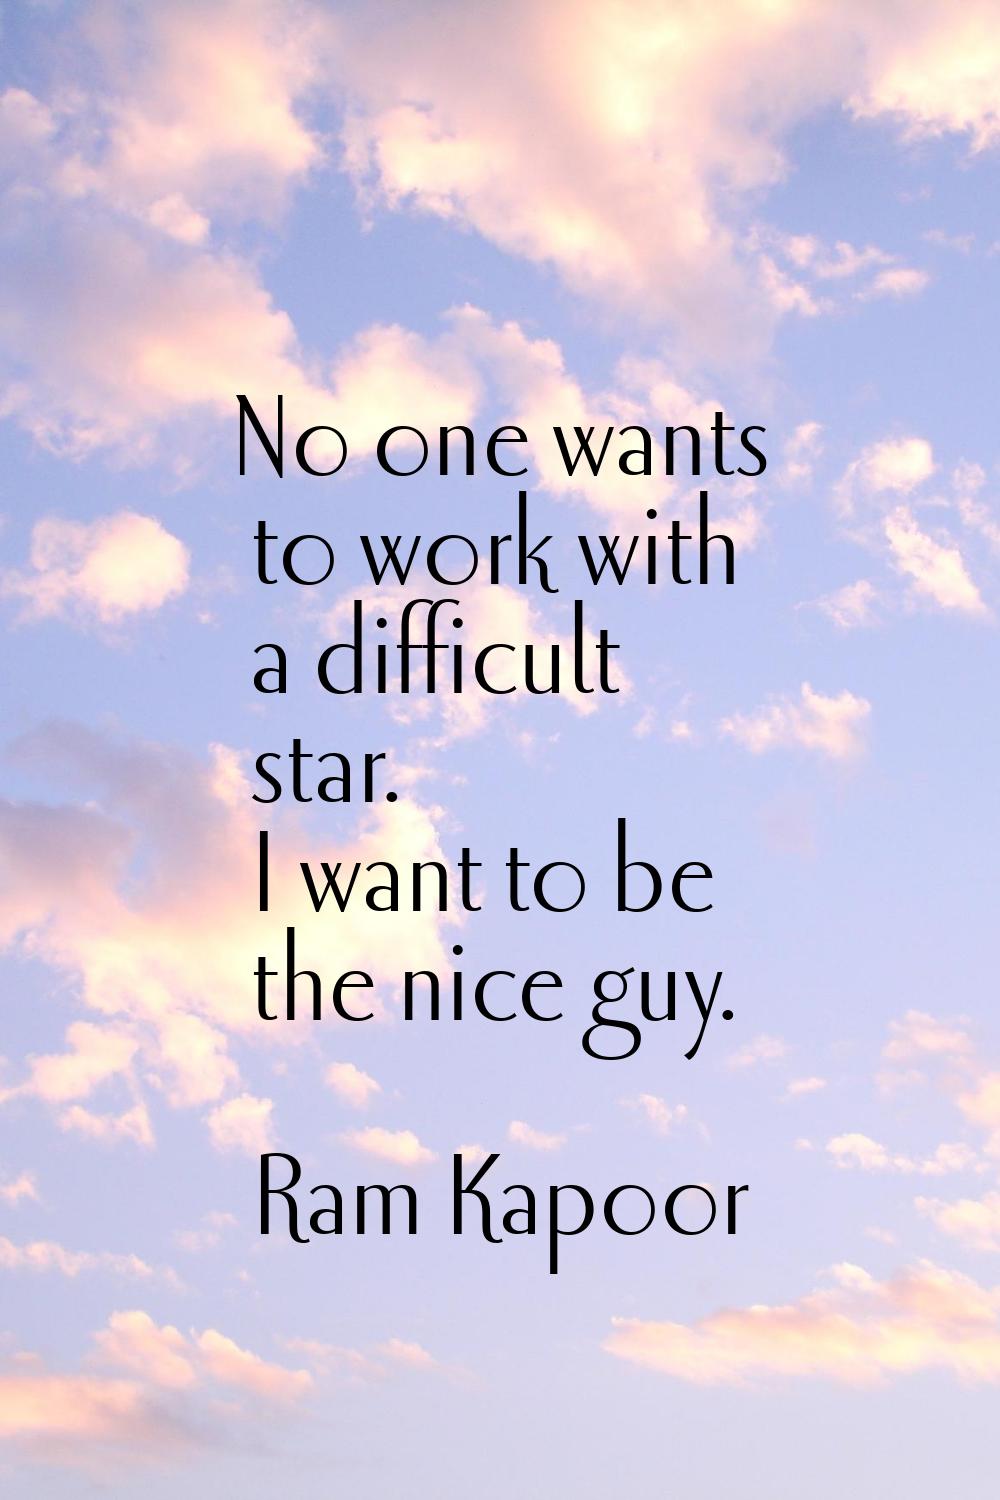 No one wants to work with a difficult star. I want to be the nice guy.